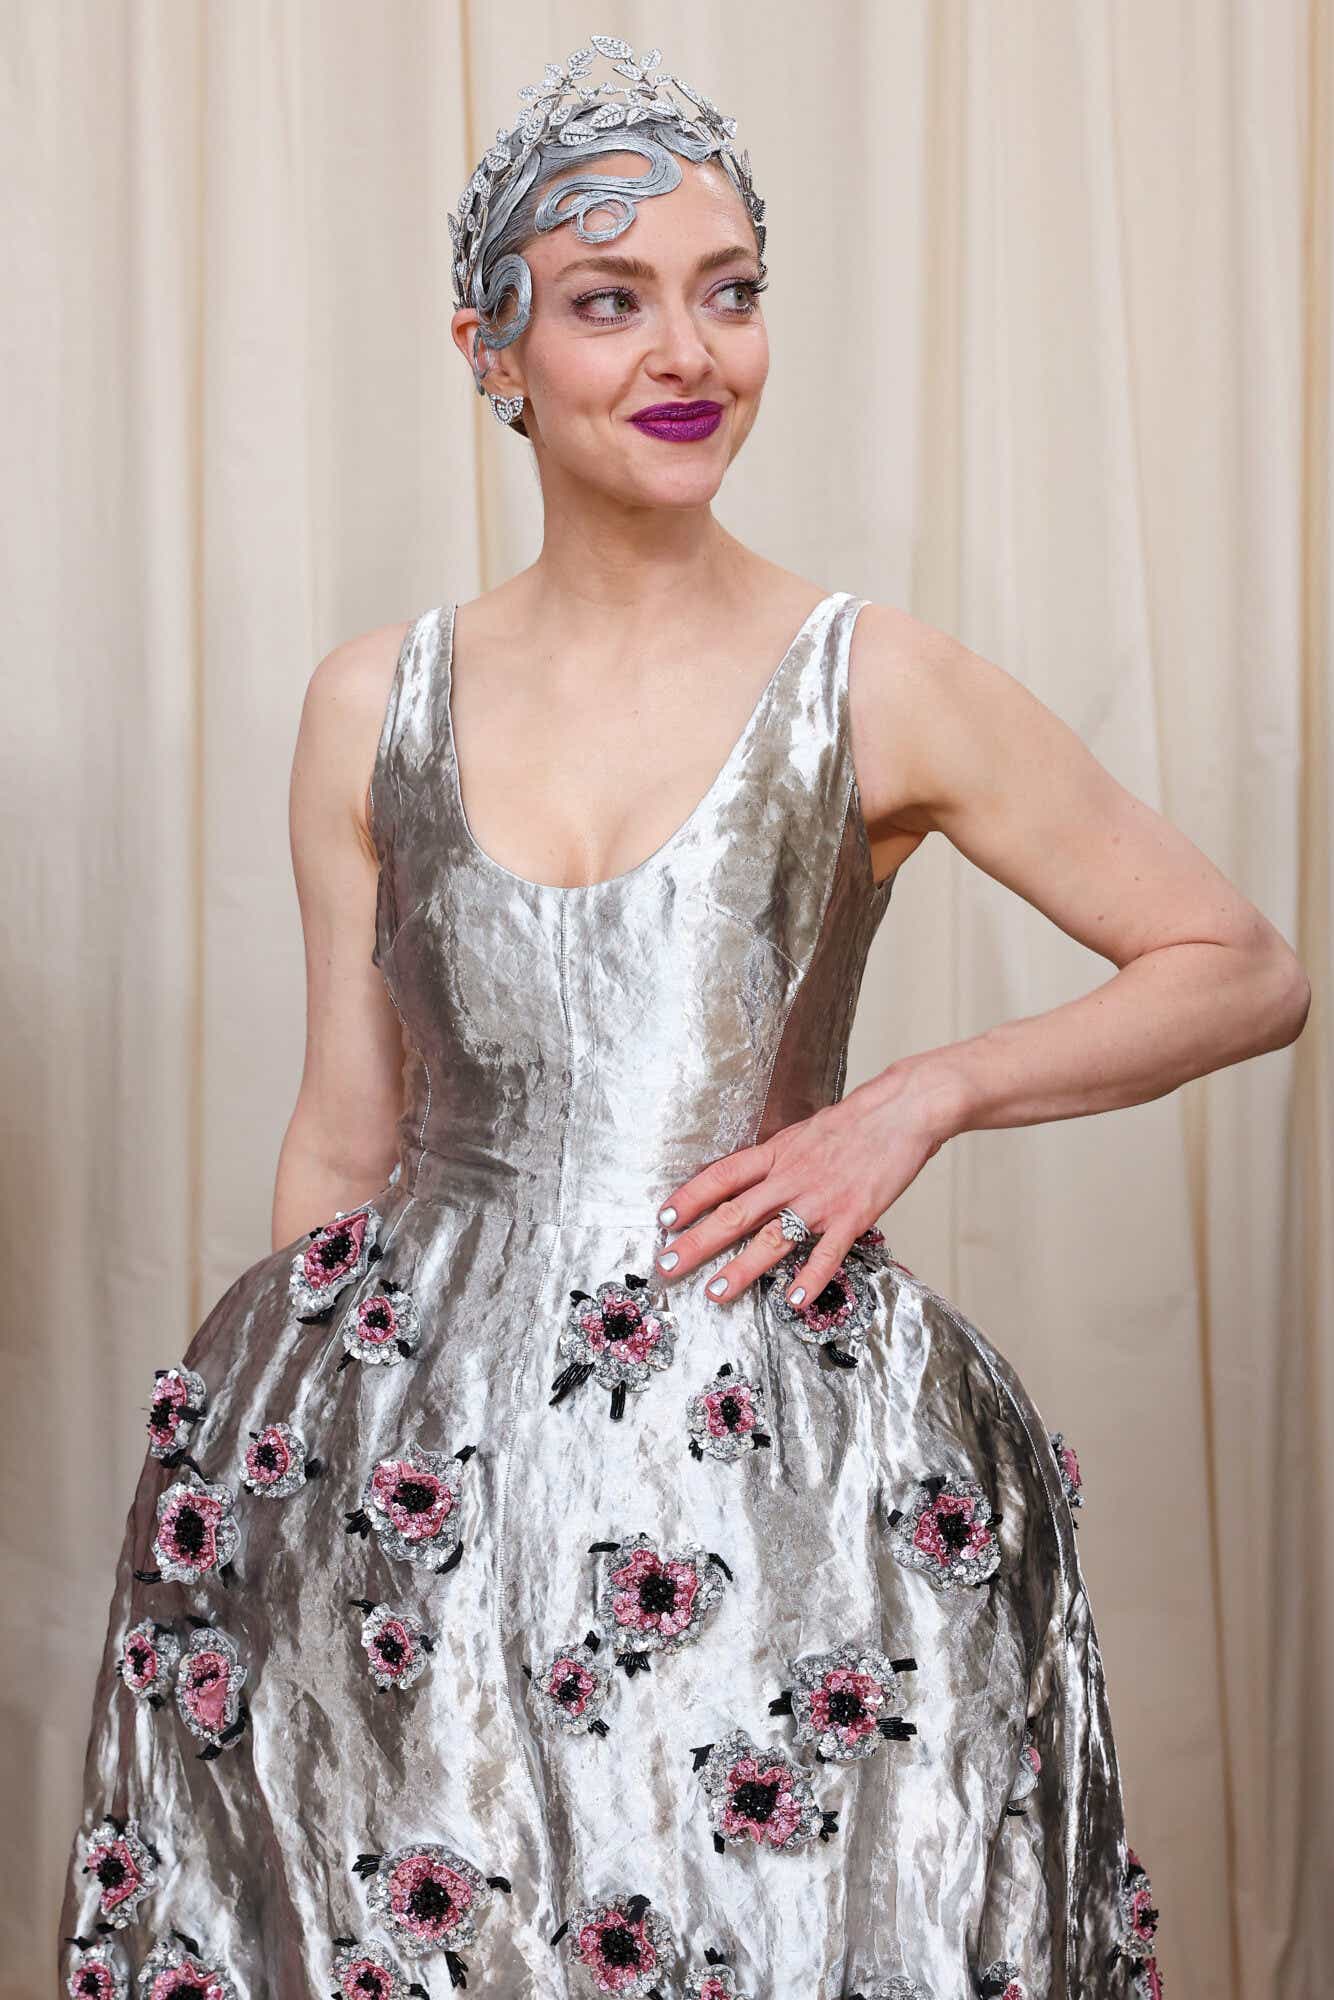 Amanda wears a sleeveless silver dress adorned with metallic silver and pink flowers and a silver imperial-style leaf headdress revealing hair sprayed into silver curls.